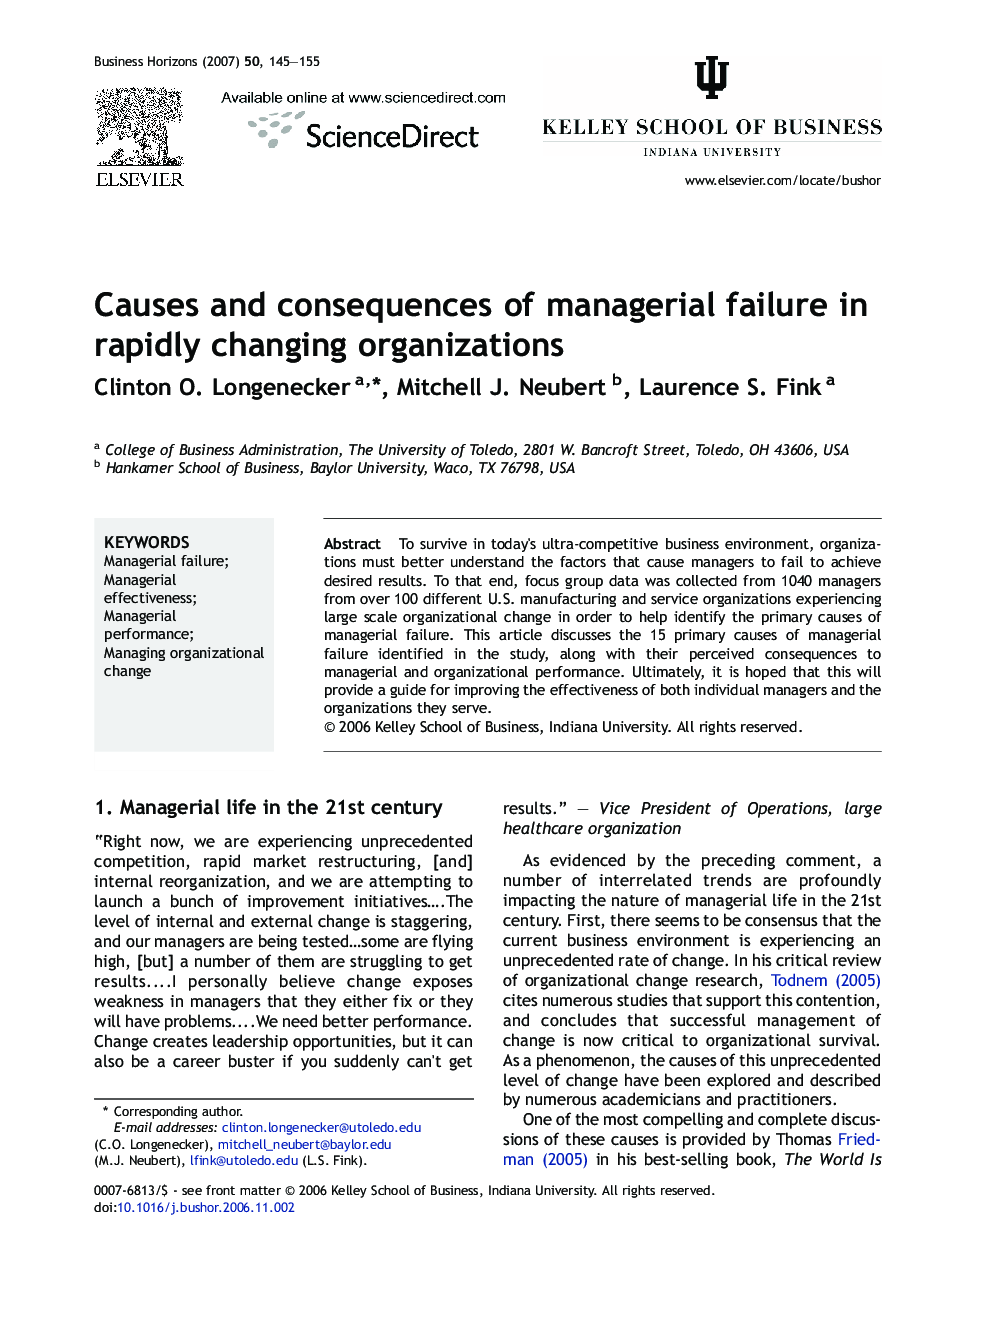 Causes and consequences of managerial failure in rapidly changing organizations